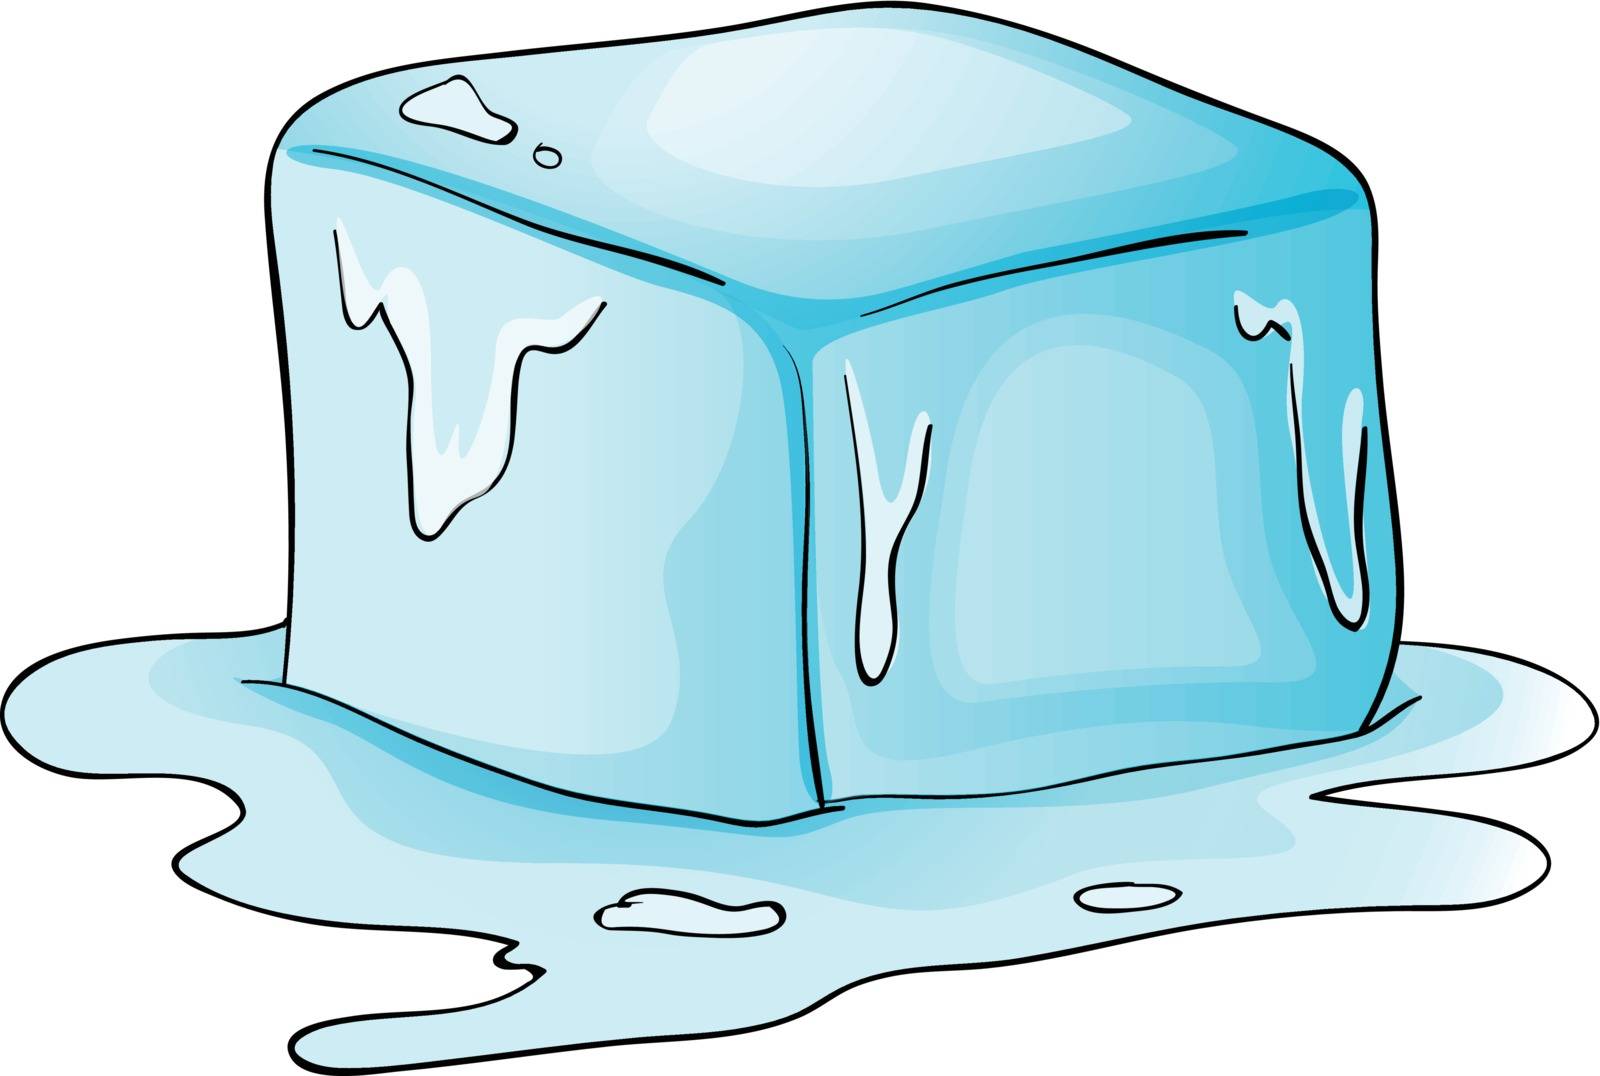 Illustration of a block of ice